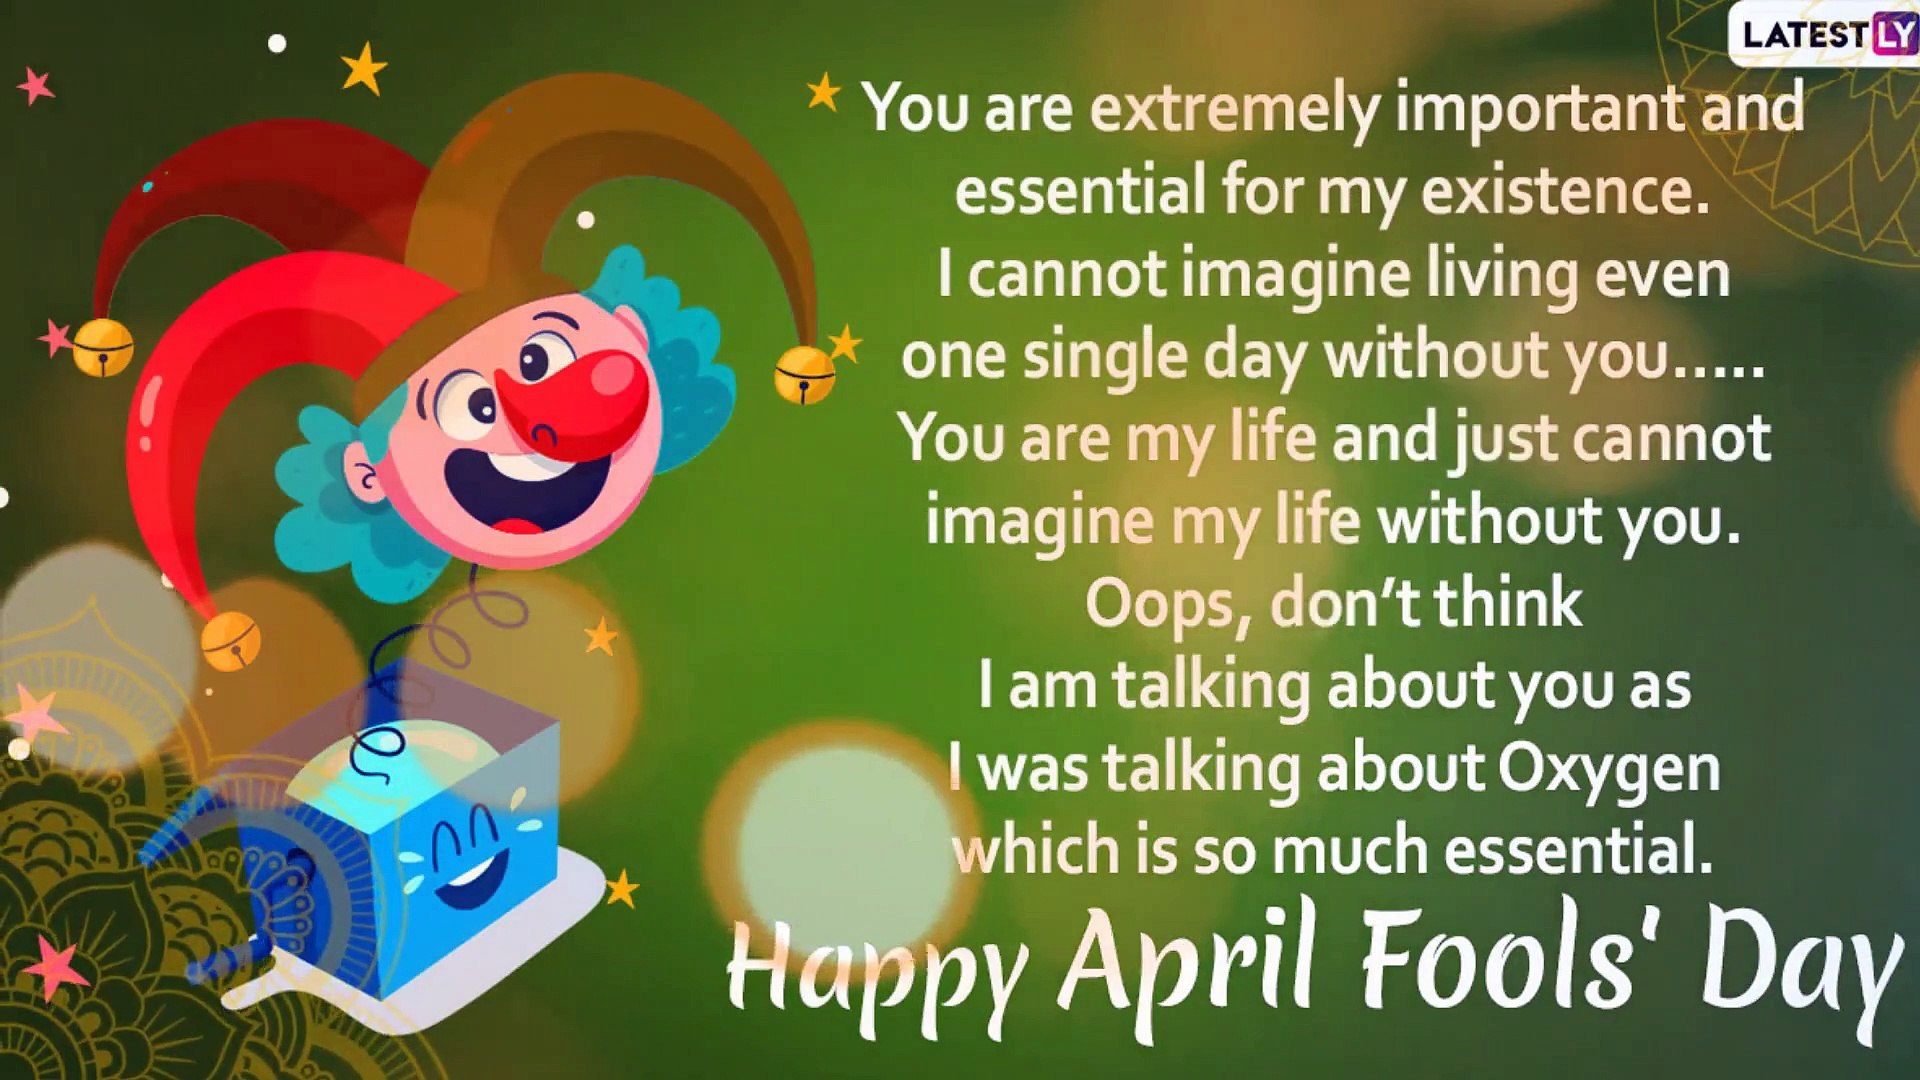 April Fools' Day Messages For Boyfriend: Funny Quotes & Cheesy Greetings  For Your Lover On April 1 - video Dailymotion